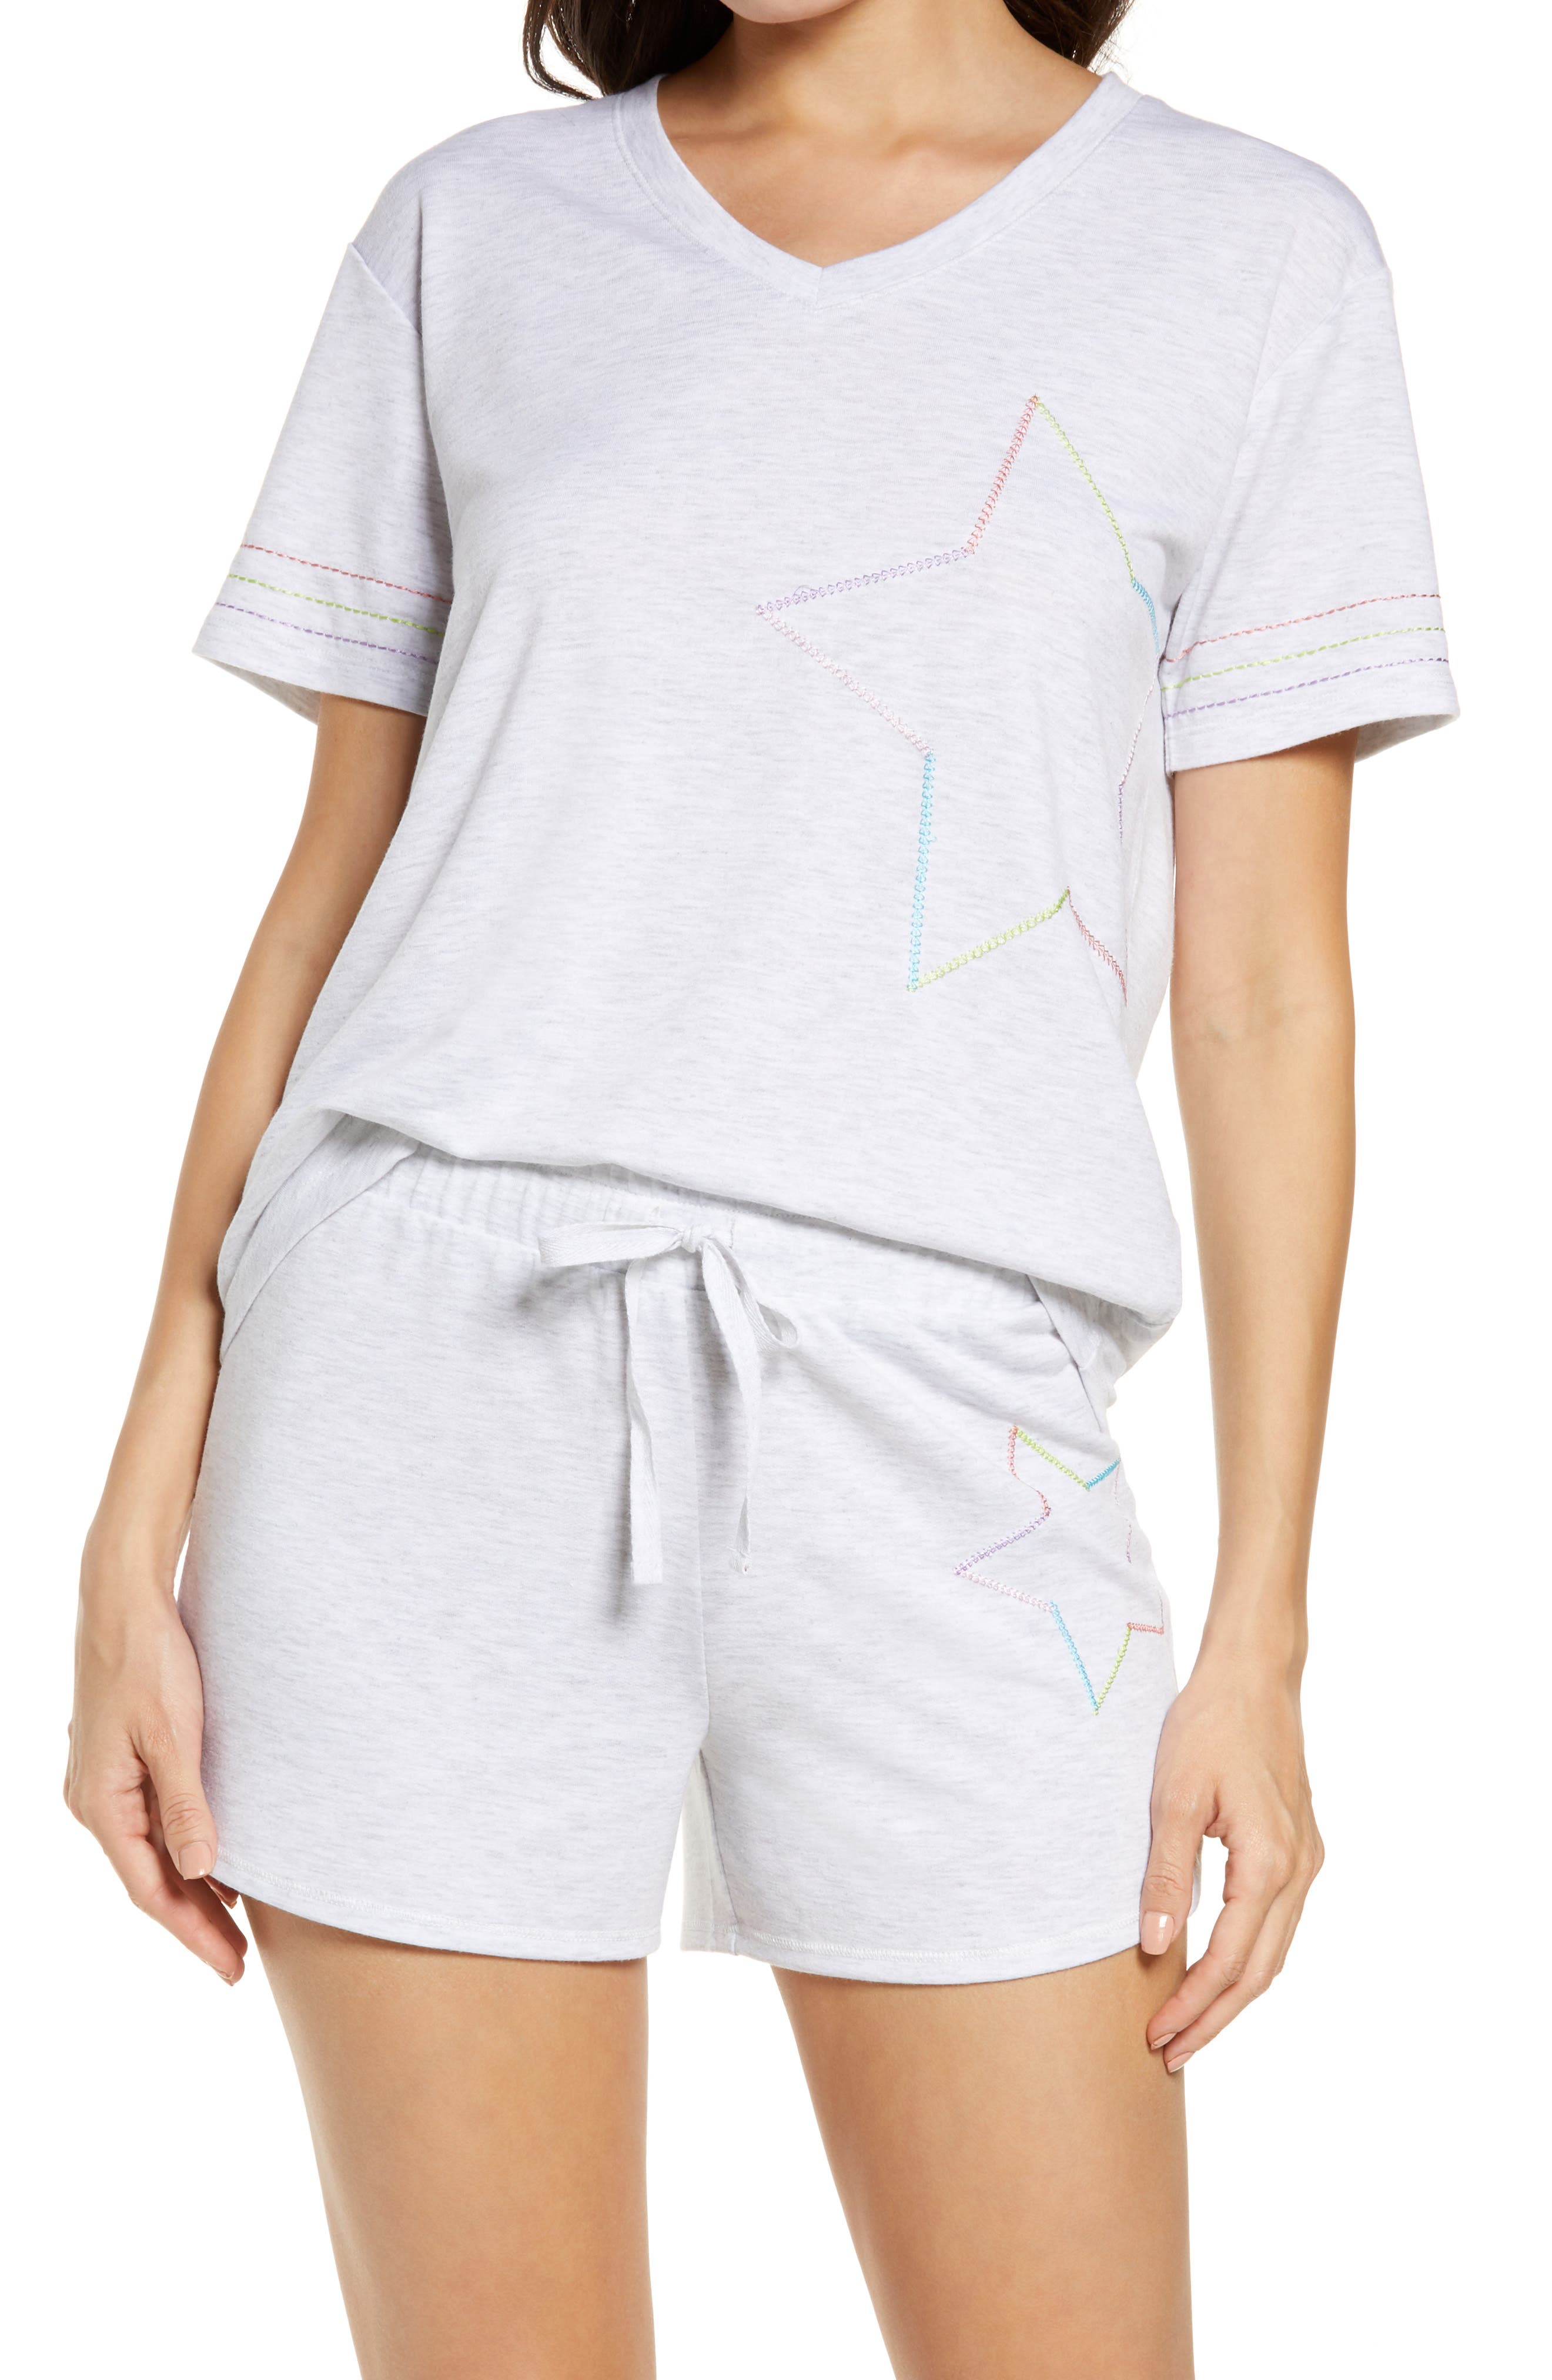 Emerson Road Embroidered Star Short Pajamas in Light Heather Grey at Nordstrom